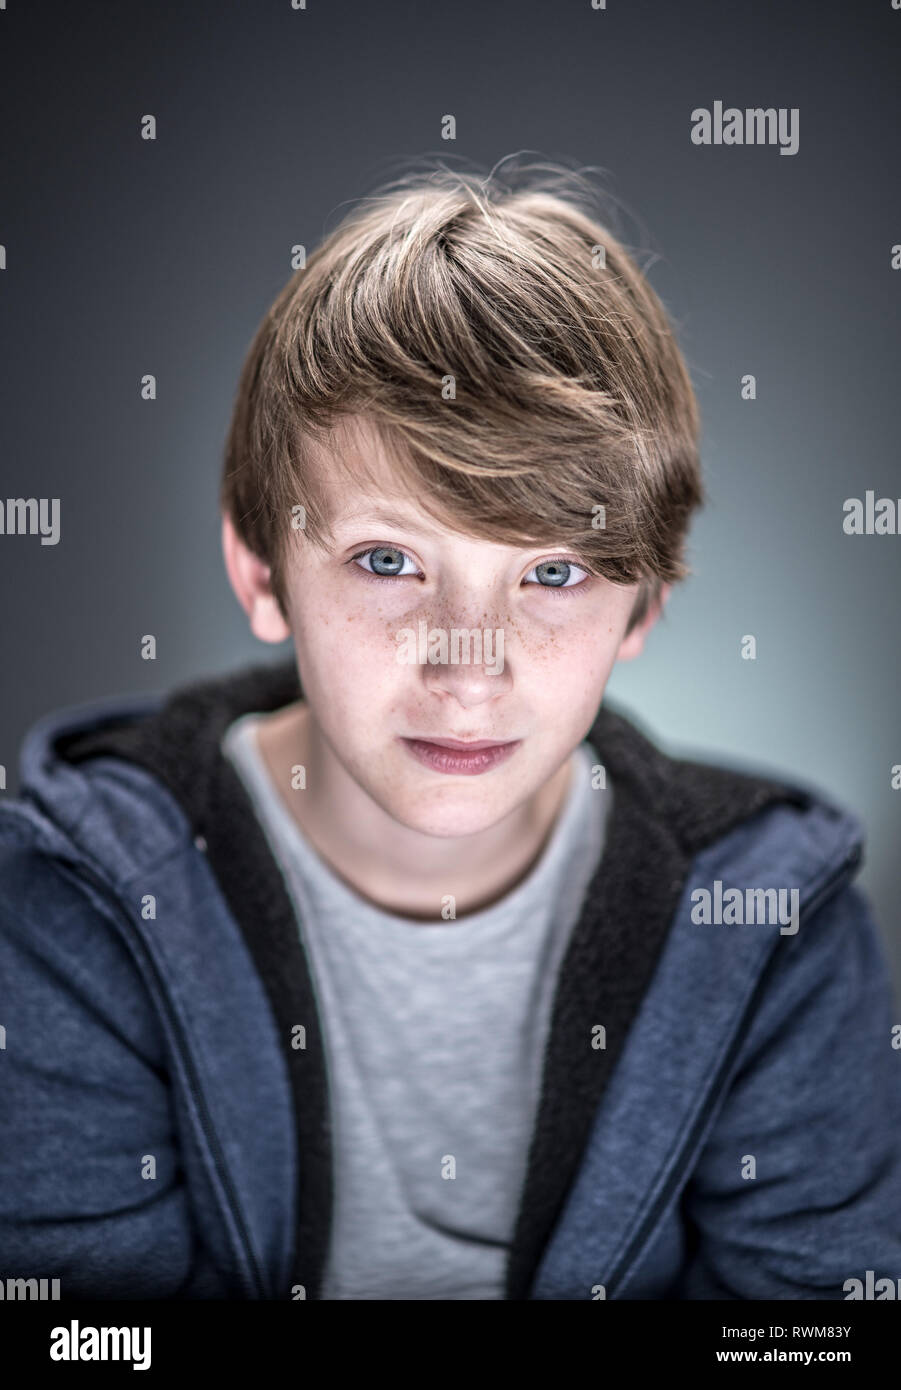 Studio portrait of a handsome and expressive young caucasian boy Stock Photo